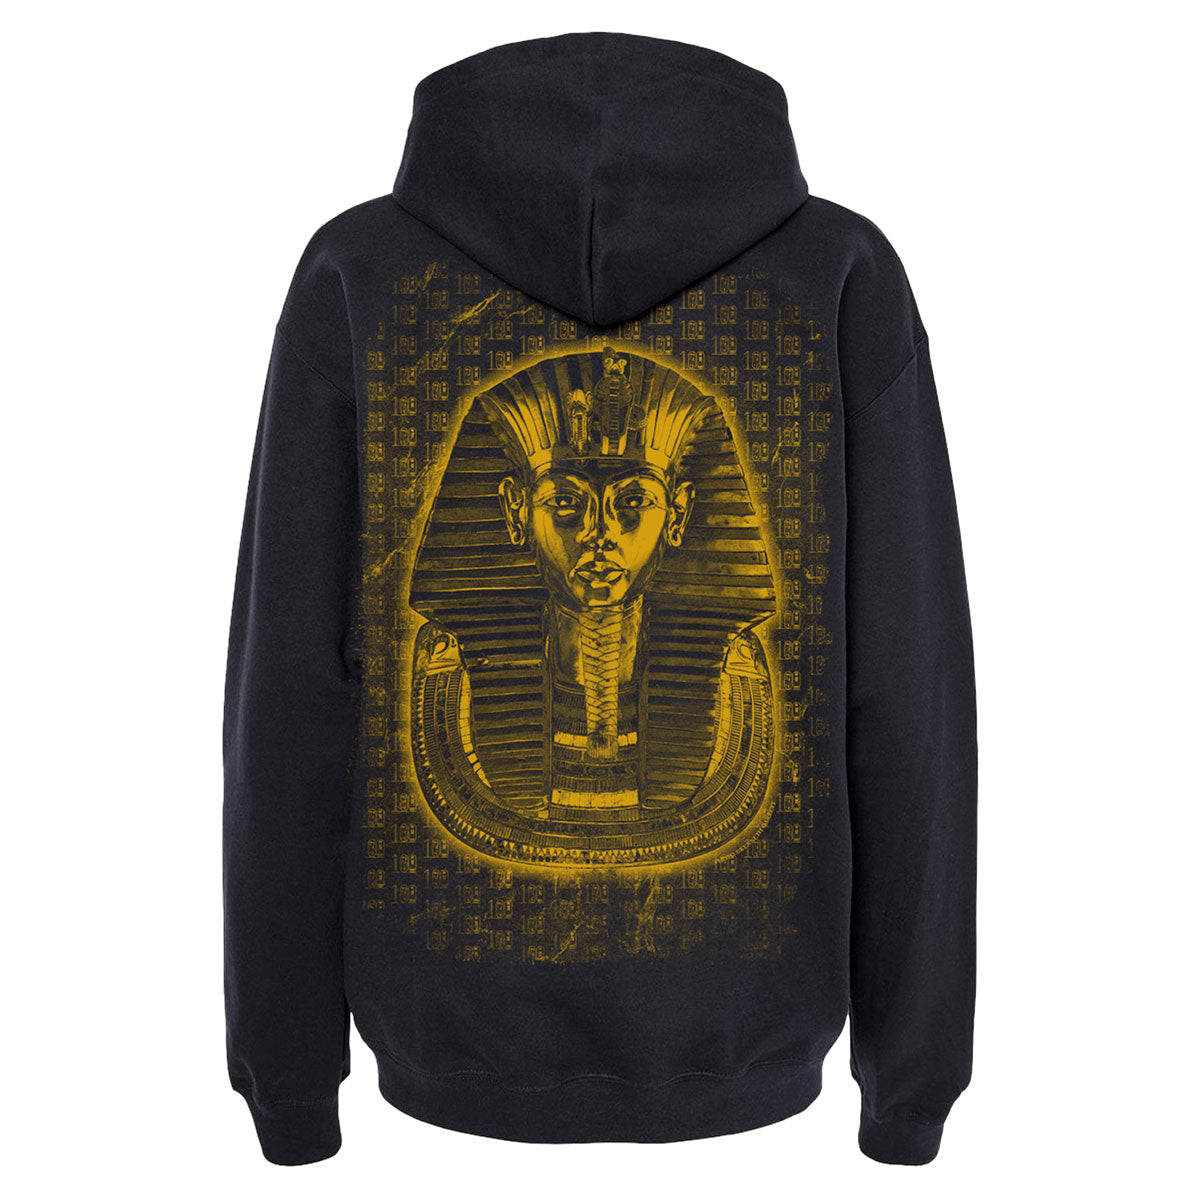 100th Anniversary Death Mask Pullover Hoodie